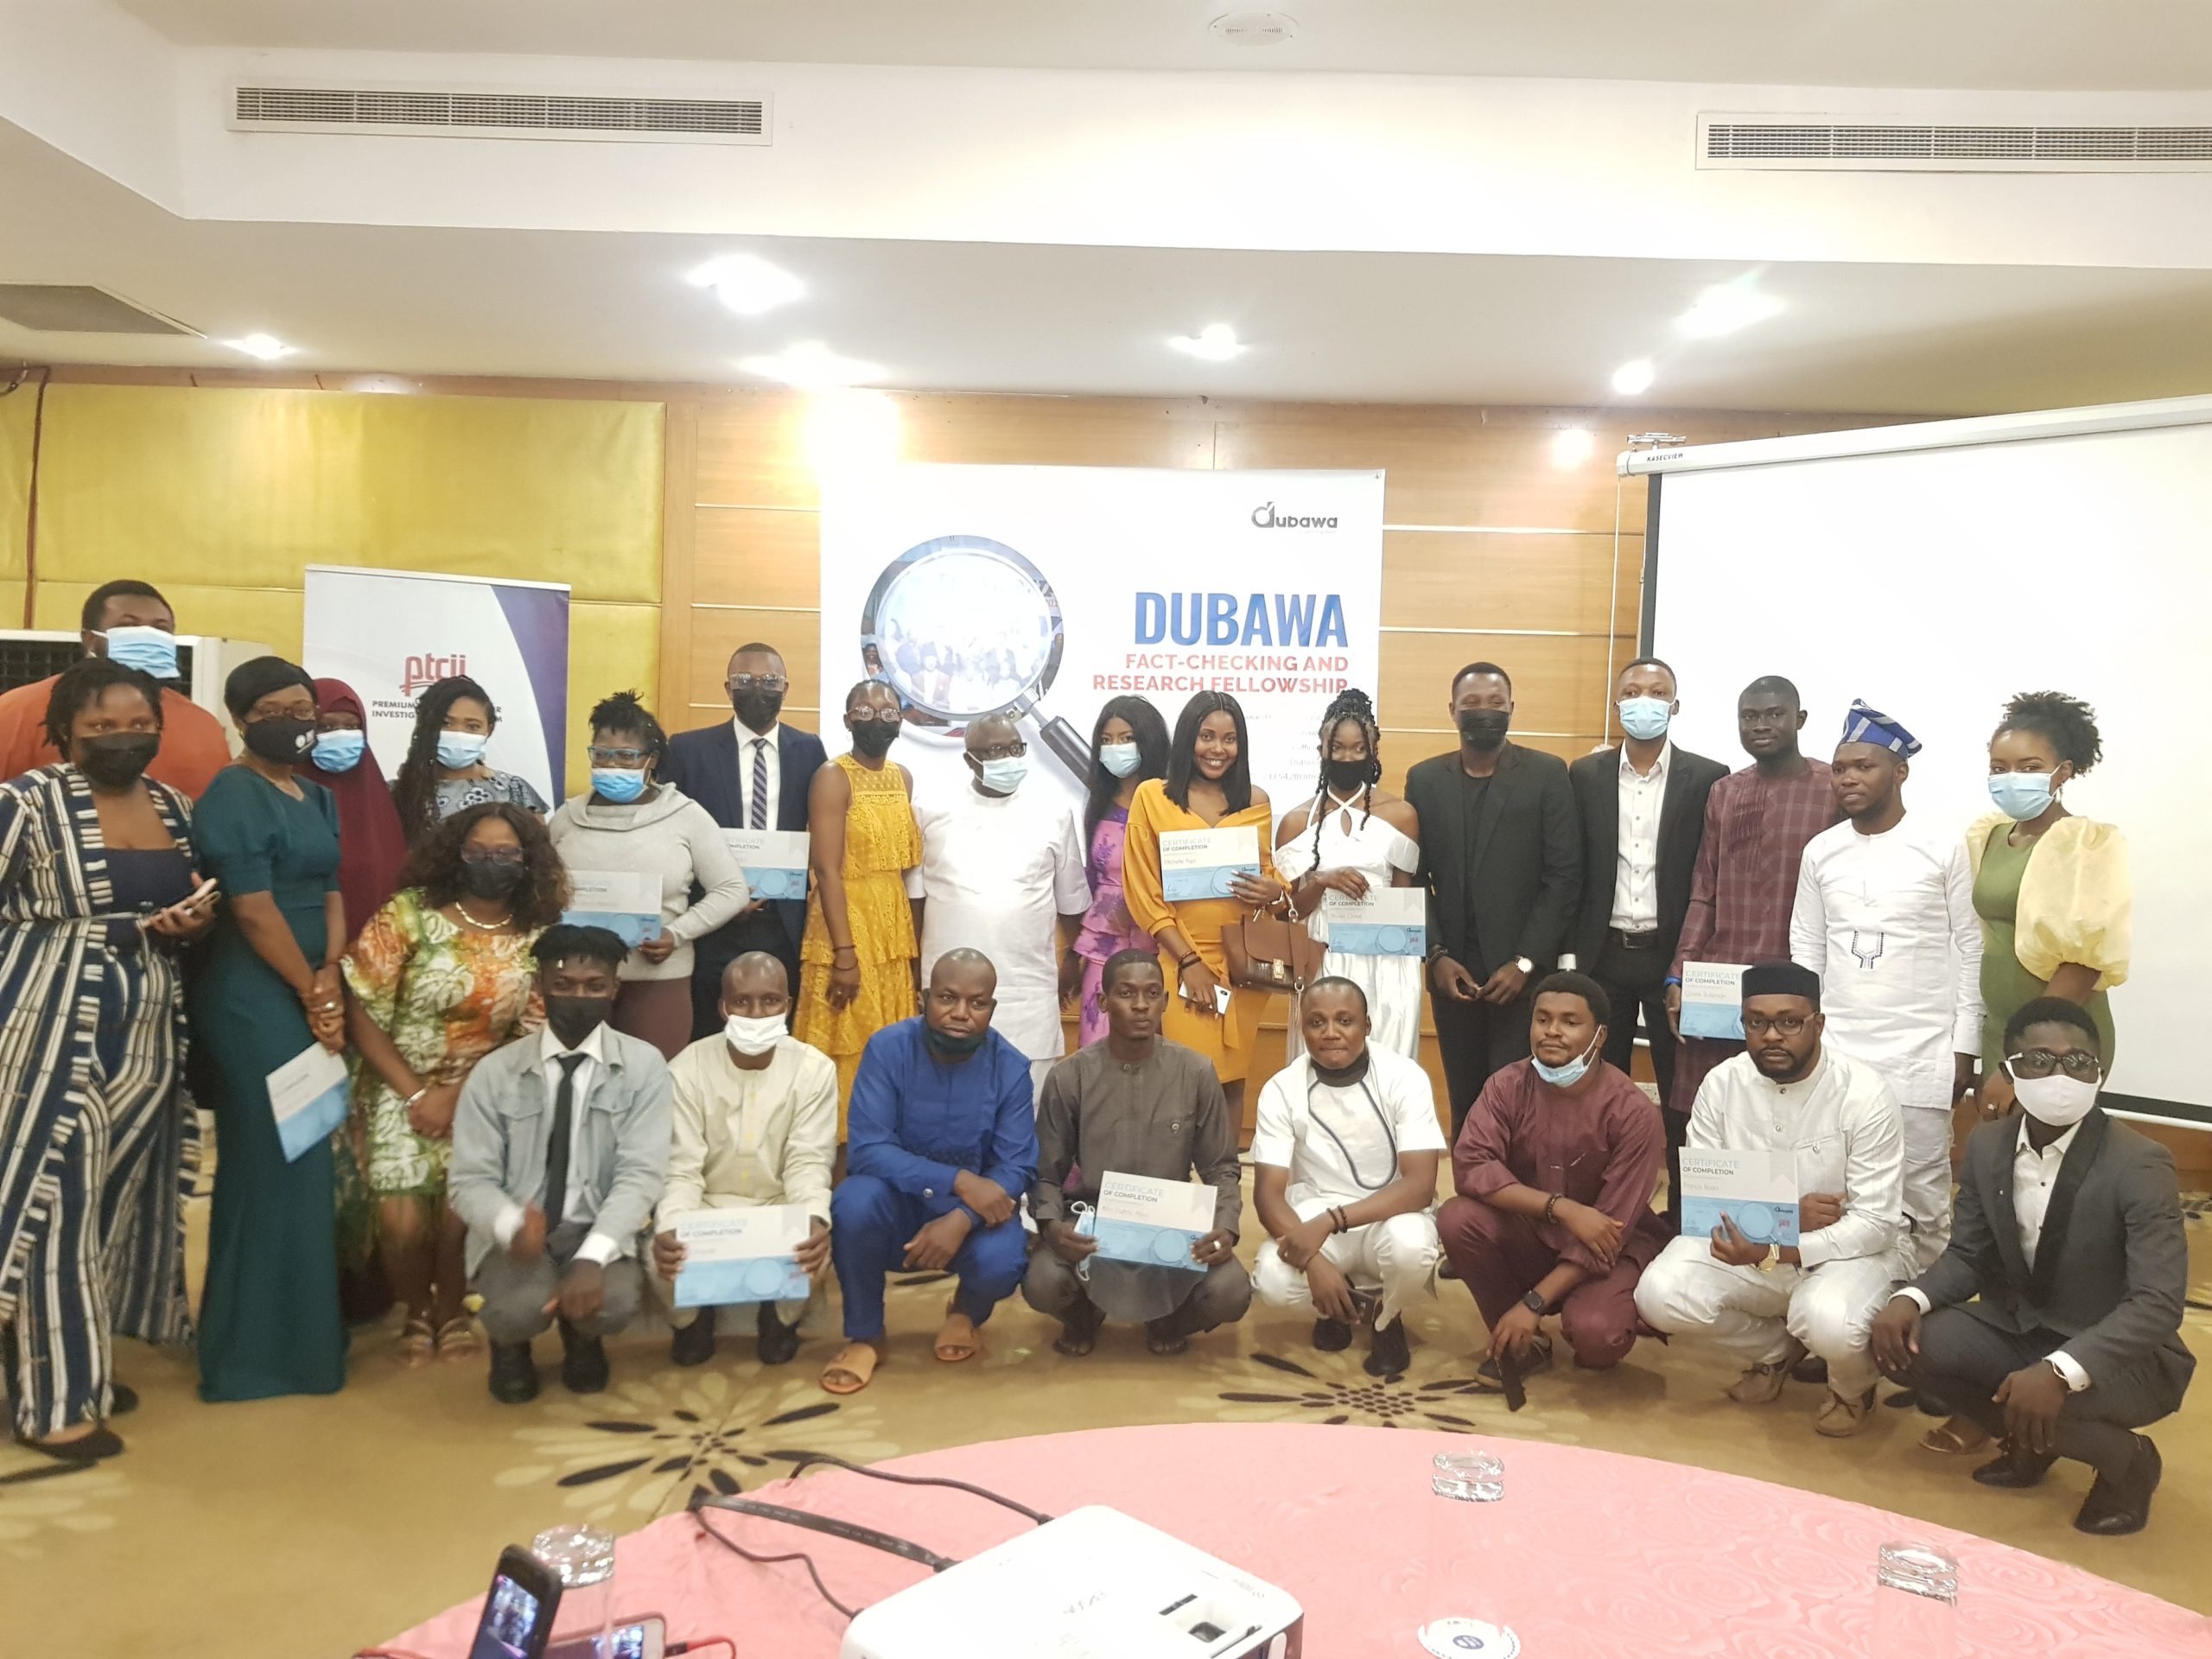 A cross section of the Dubawa 2020 fact-checking fellows flanked by the Dubawa and PTCIJ teams.